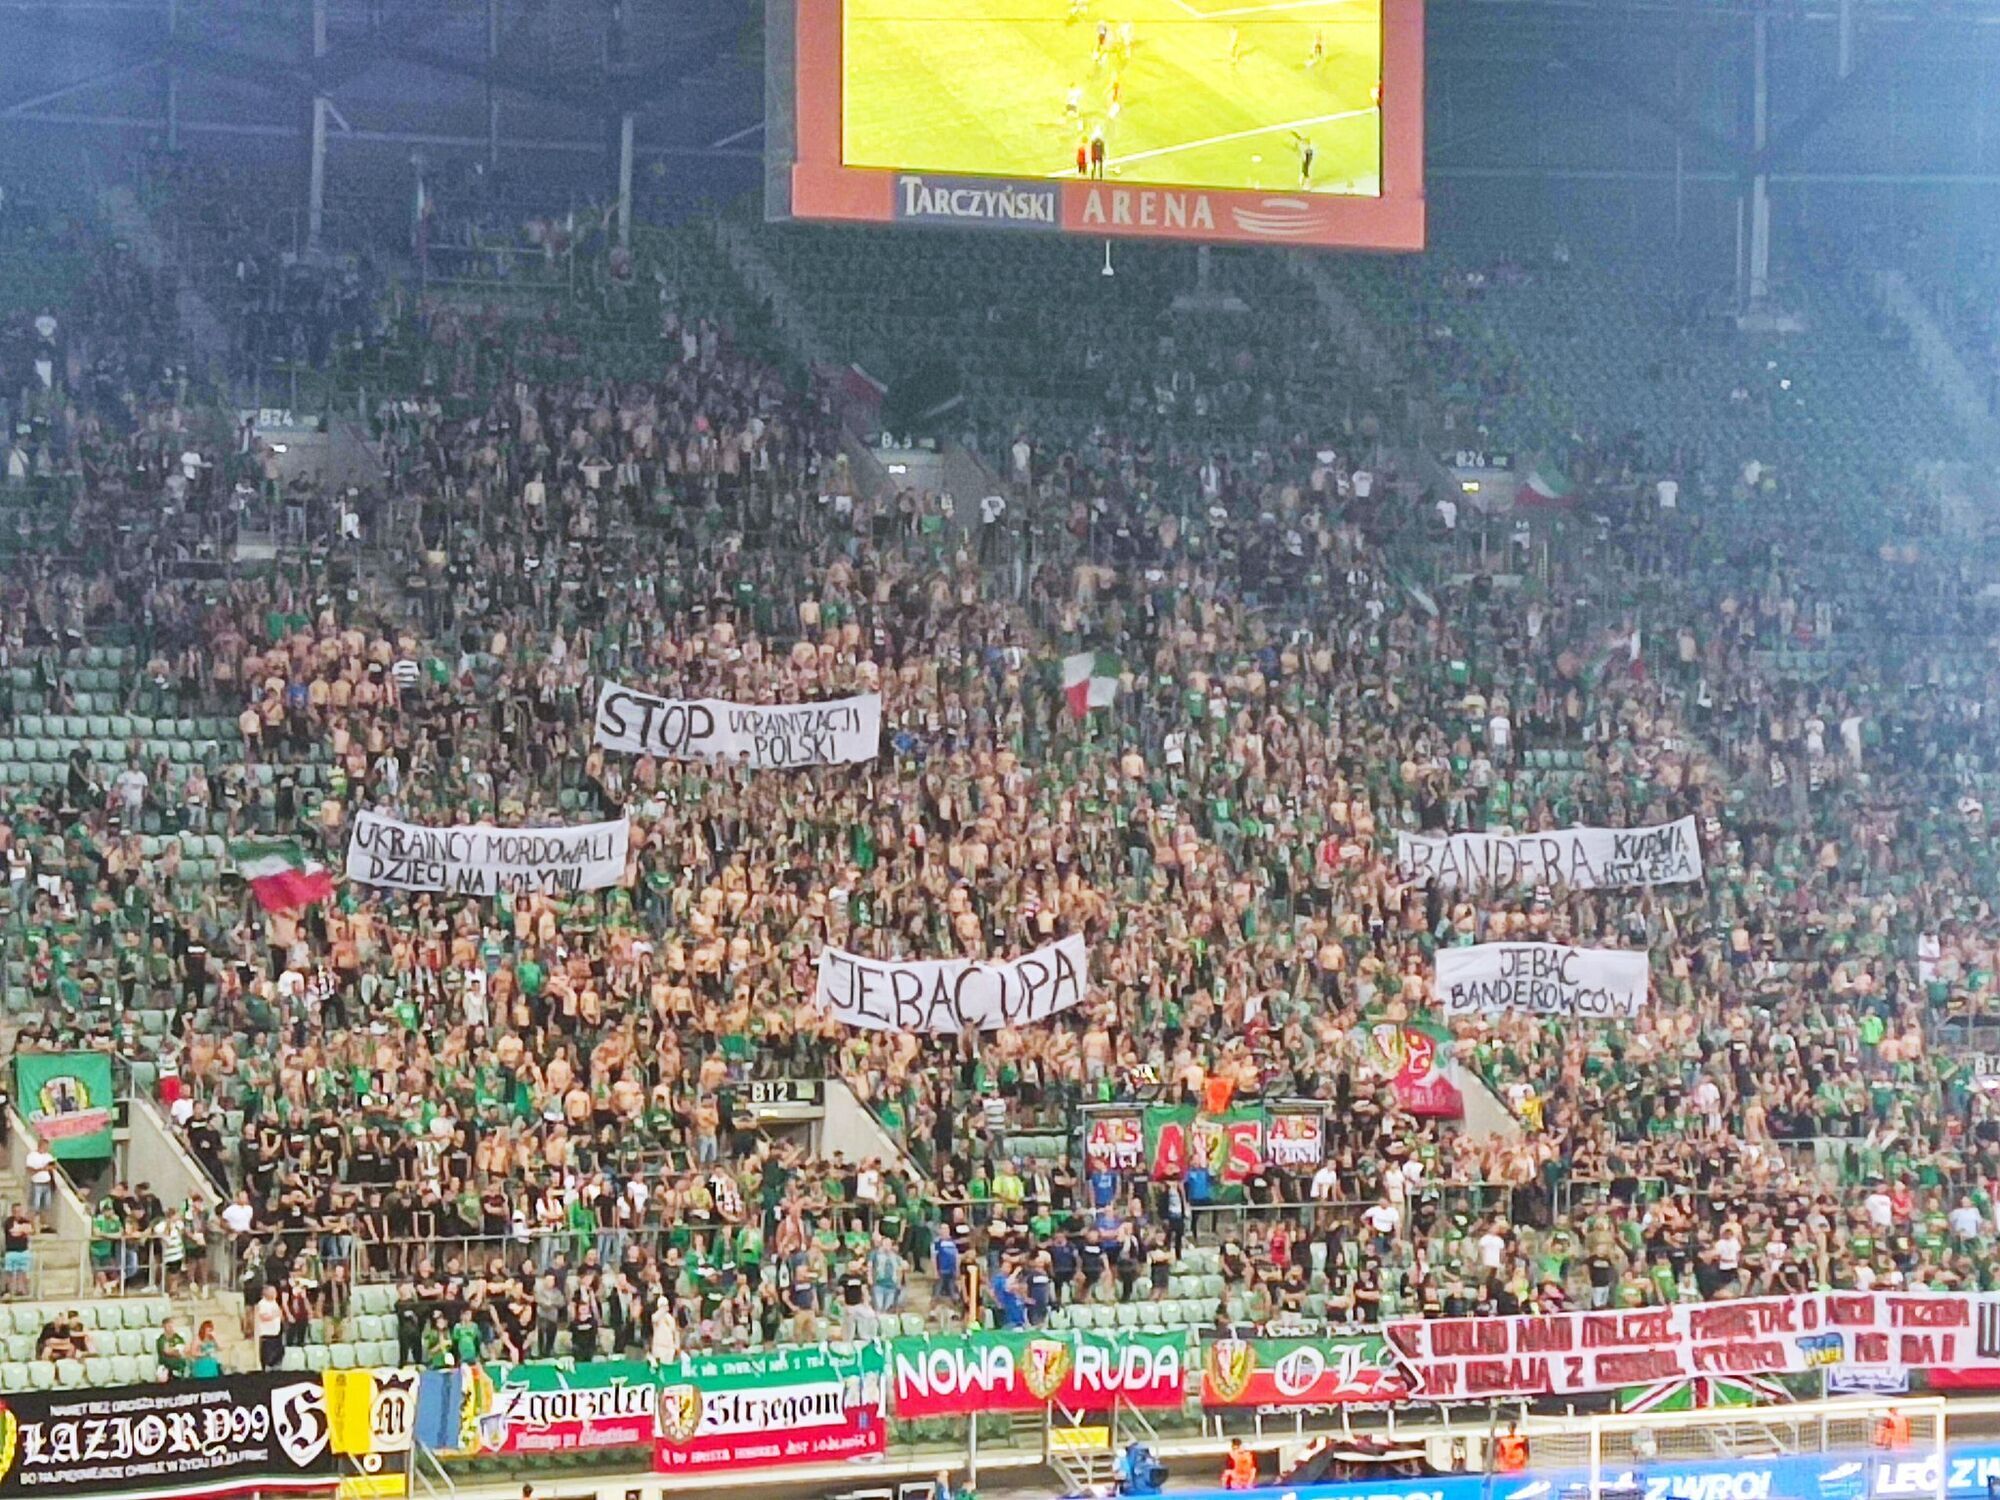 Fans in Poland who protested against Ukraine have been hit with karma